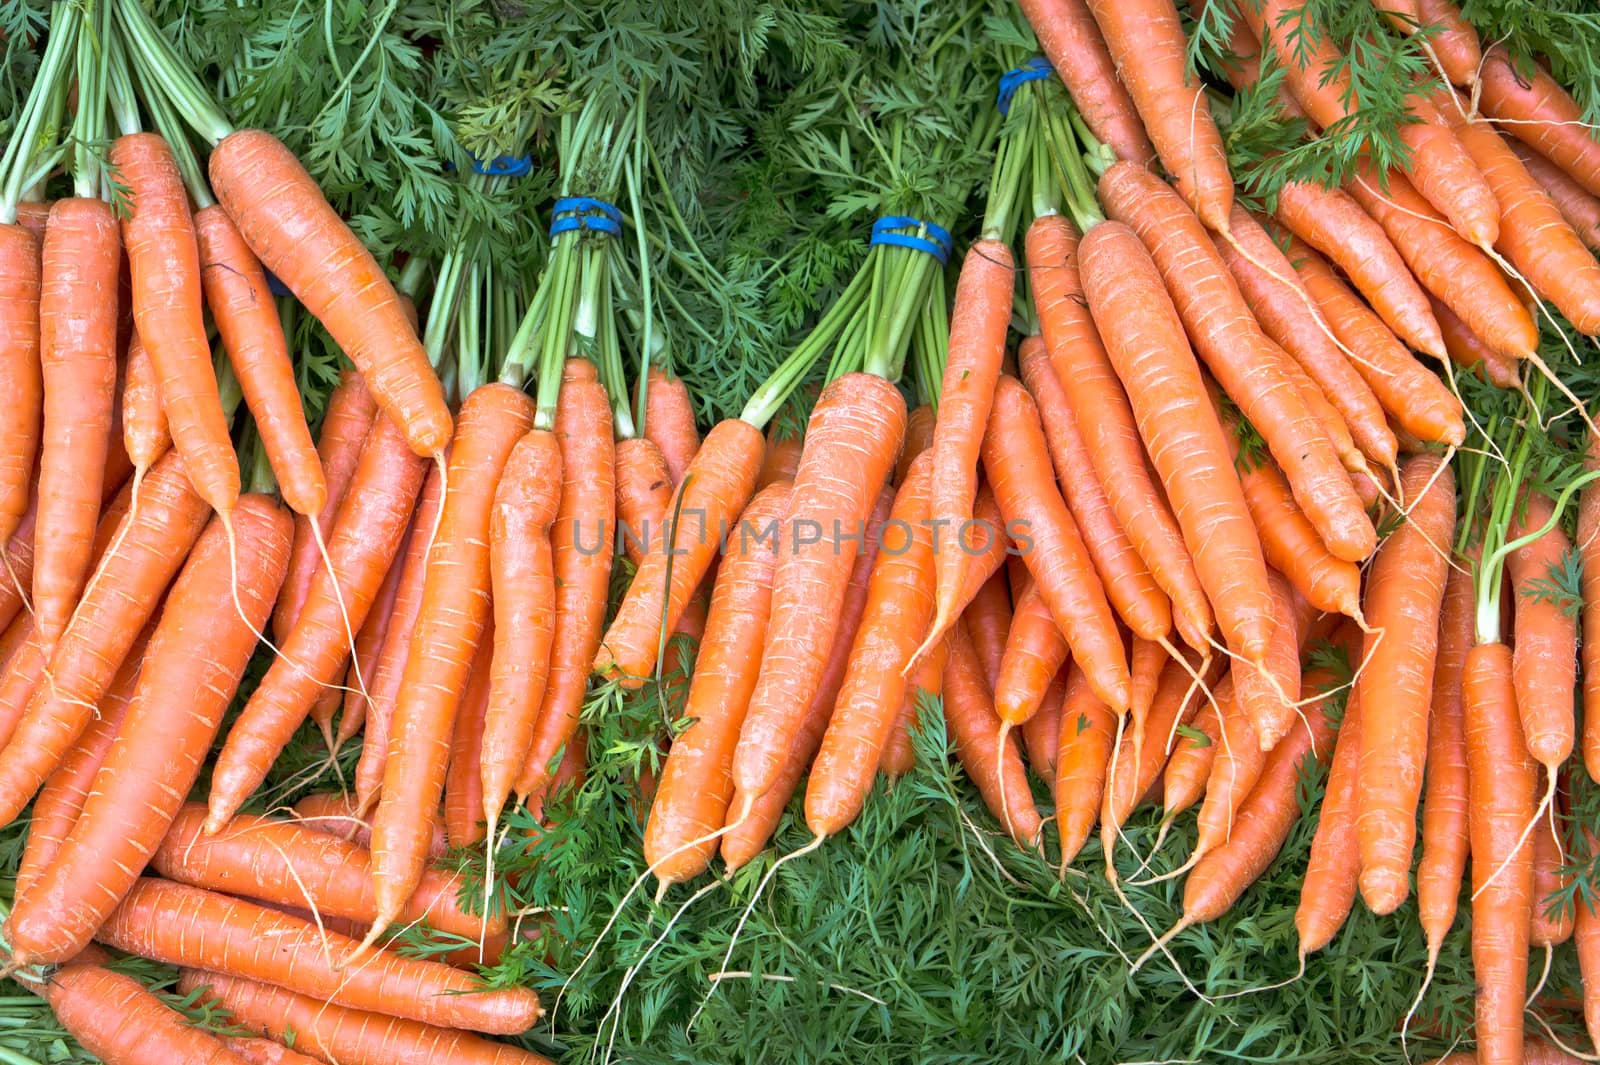 Bunches of freshly picked carrots